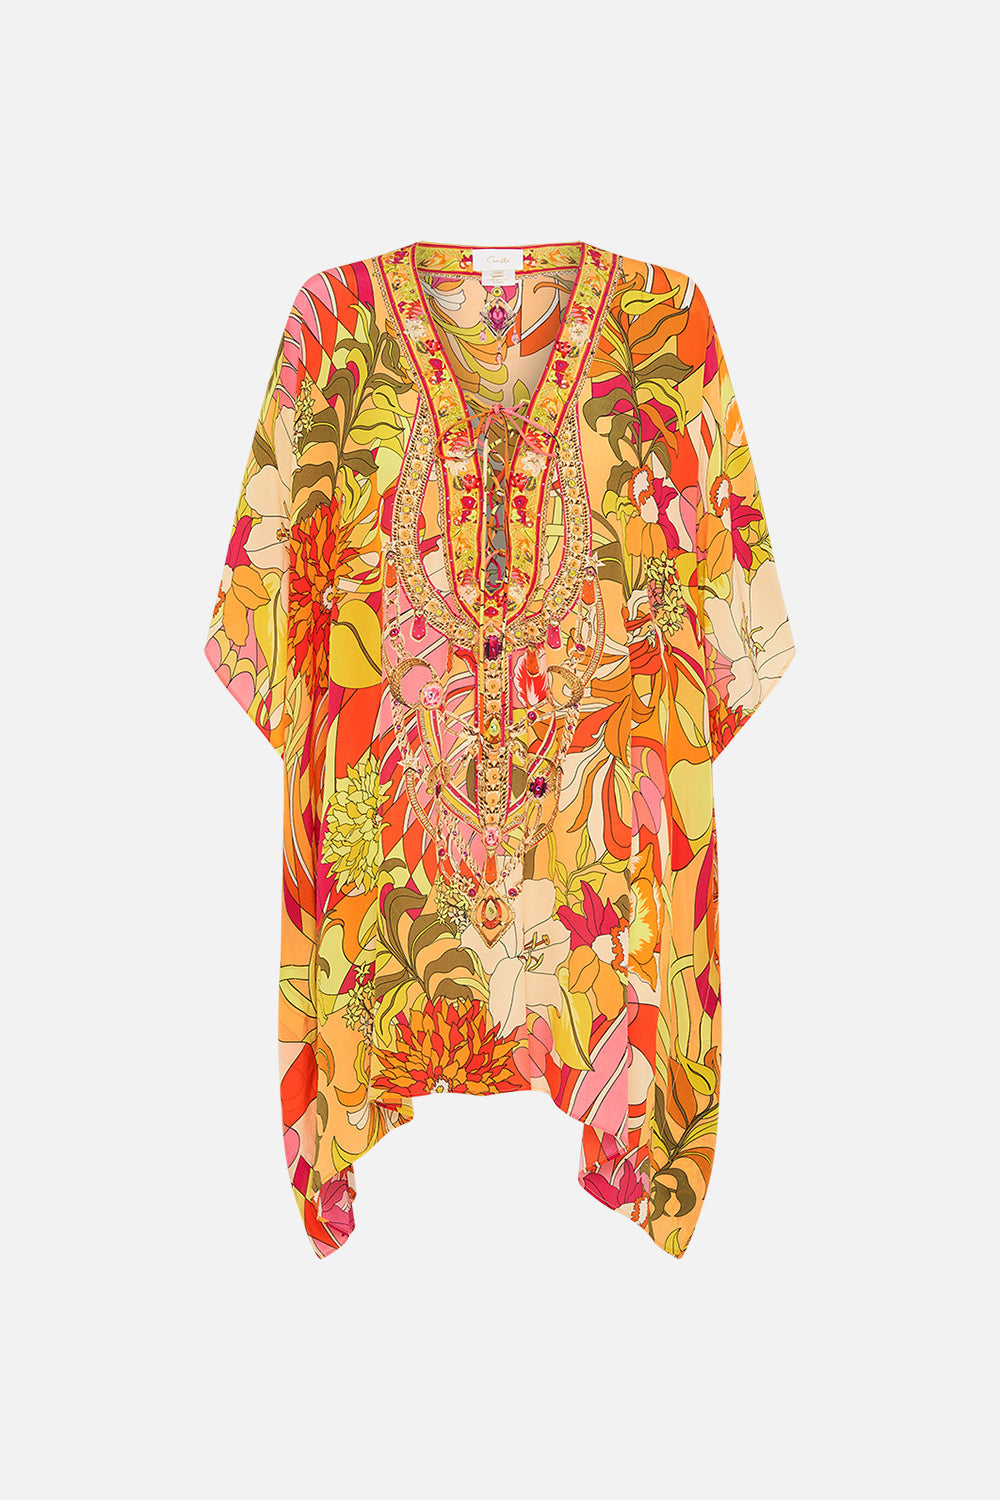 CAMILLA Floral Short Lace Up Kaftan in The Flower Child Society print